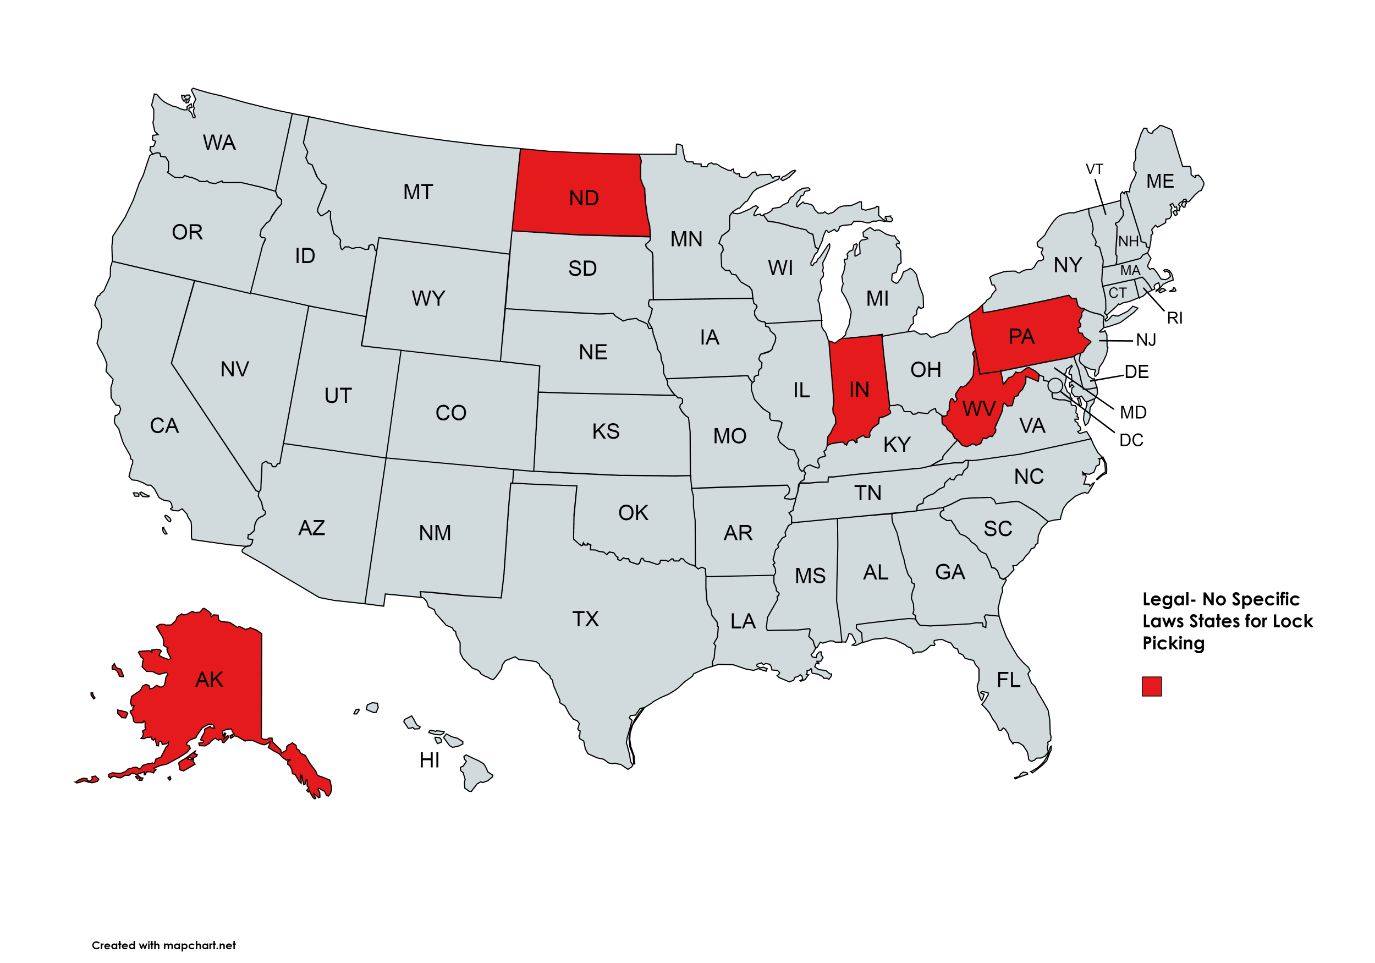 map of states of United states of America highlighting the states in red having legal -no specific laws status in case of lock picking. these states include Arkansas, Indiana, North Dakota, Pennsylvania, and West Virginia.